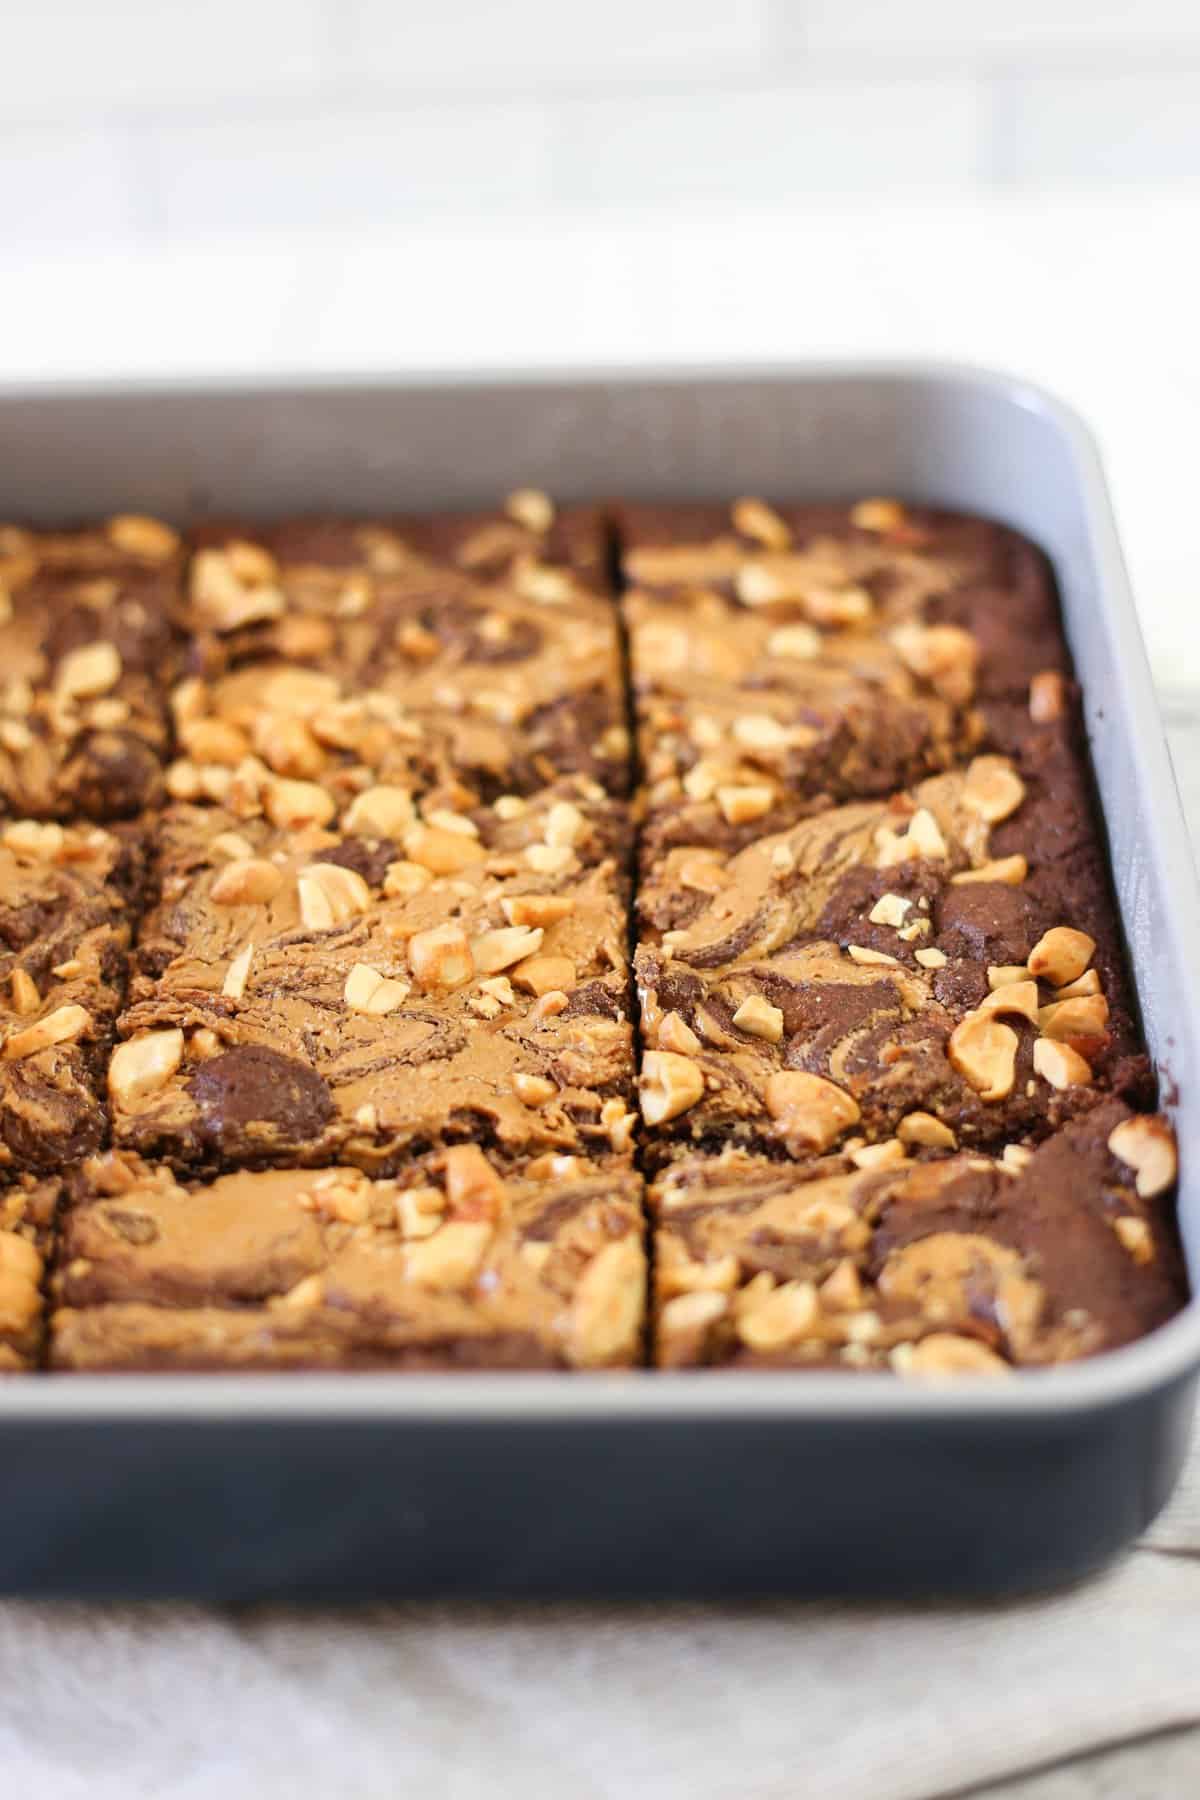 Peanut Butter Swirl Brownies fully cooked and sliced in a 9x9 metal baking pan.